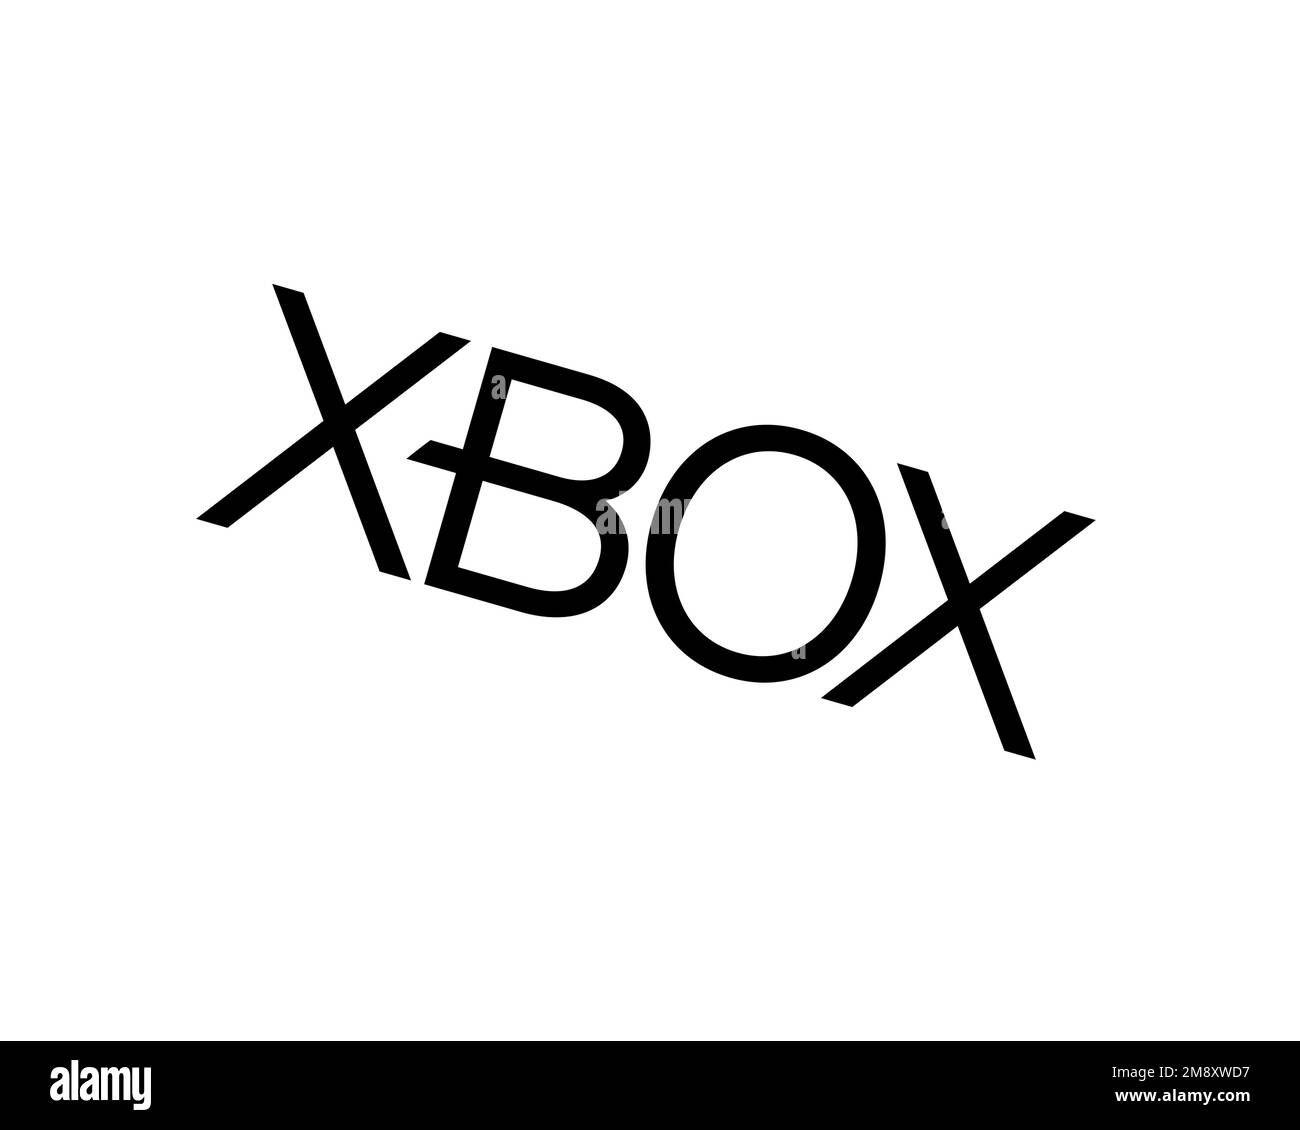 Xbox background Cut Out Stock Images & Pictures - Page 3 - Alamy